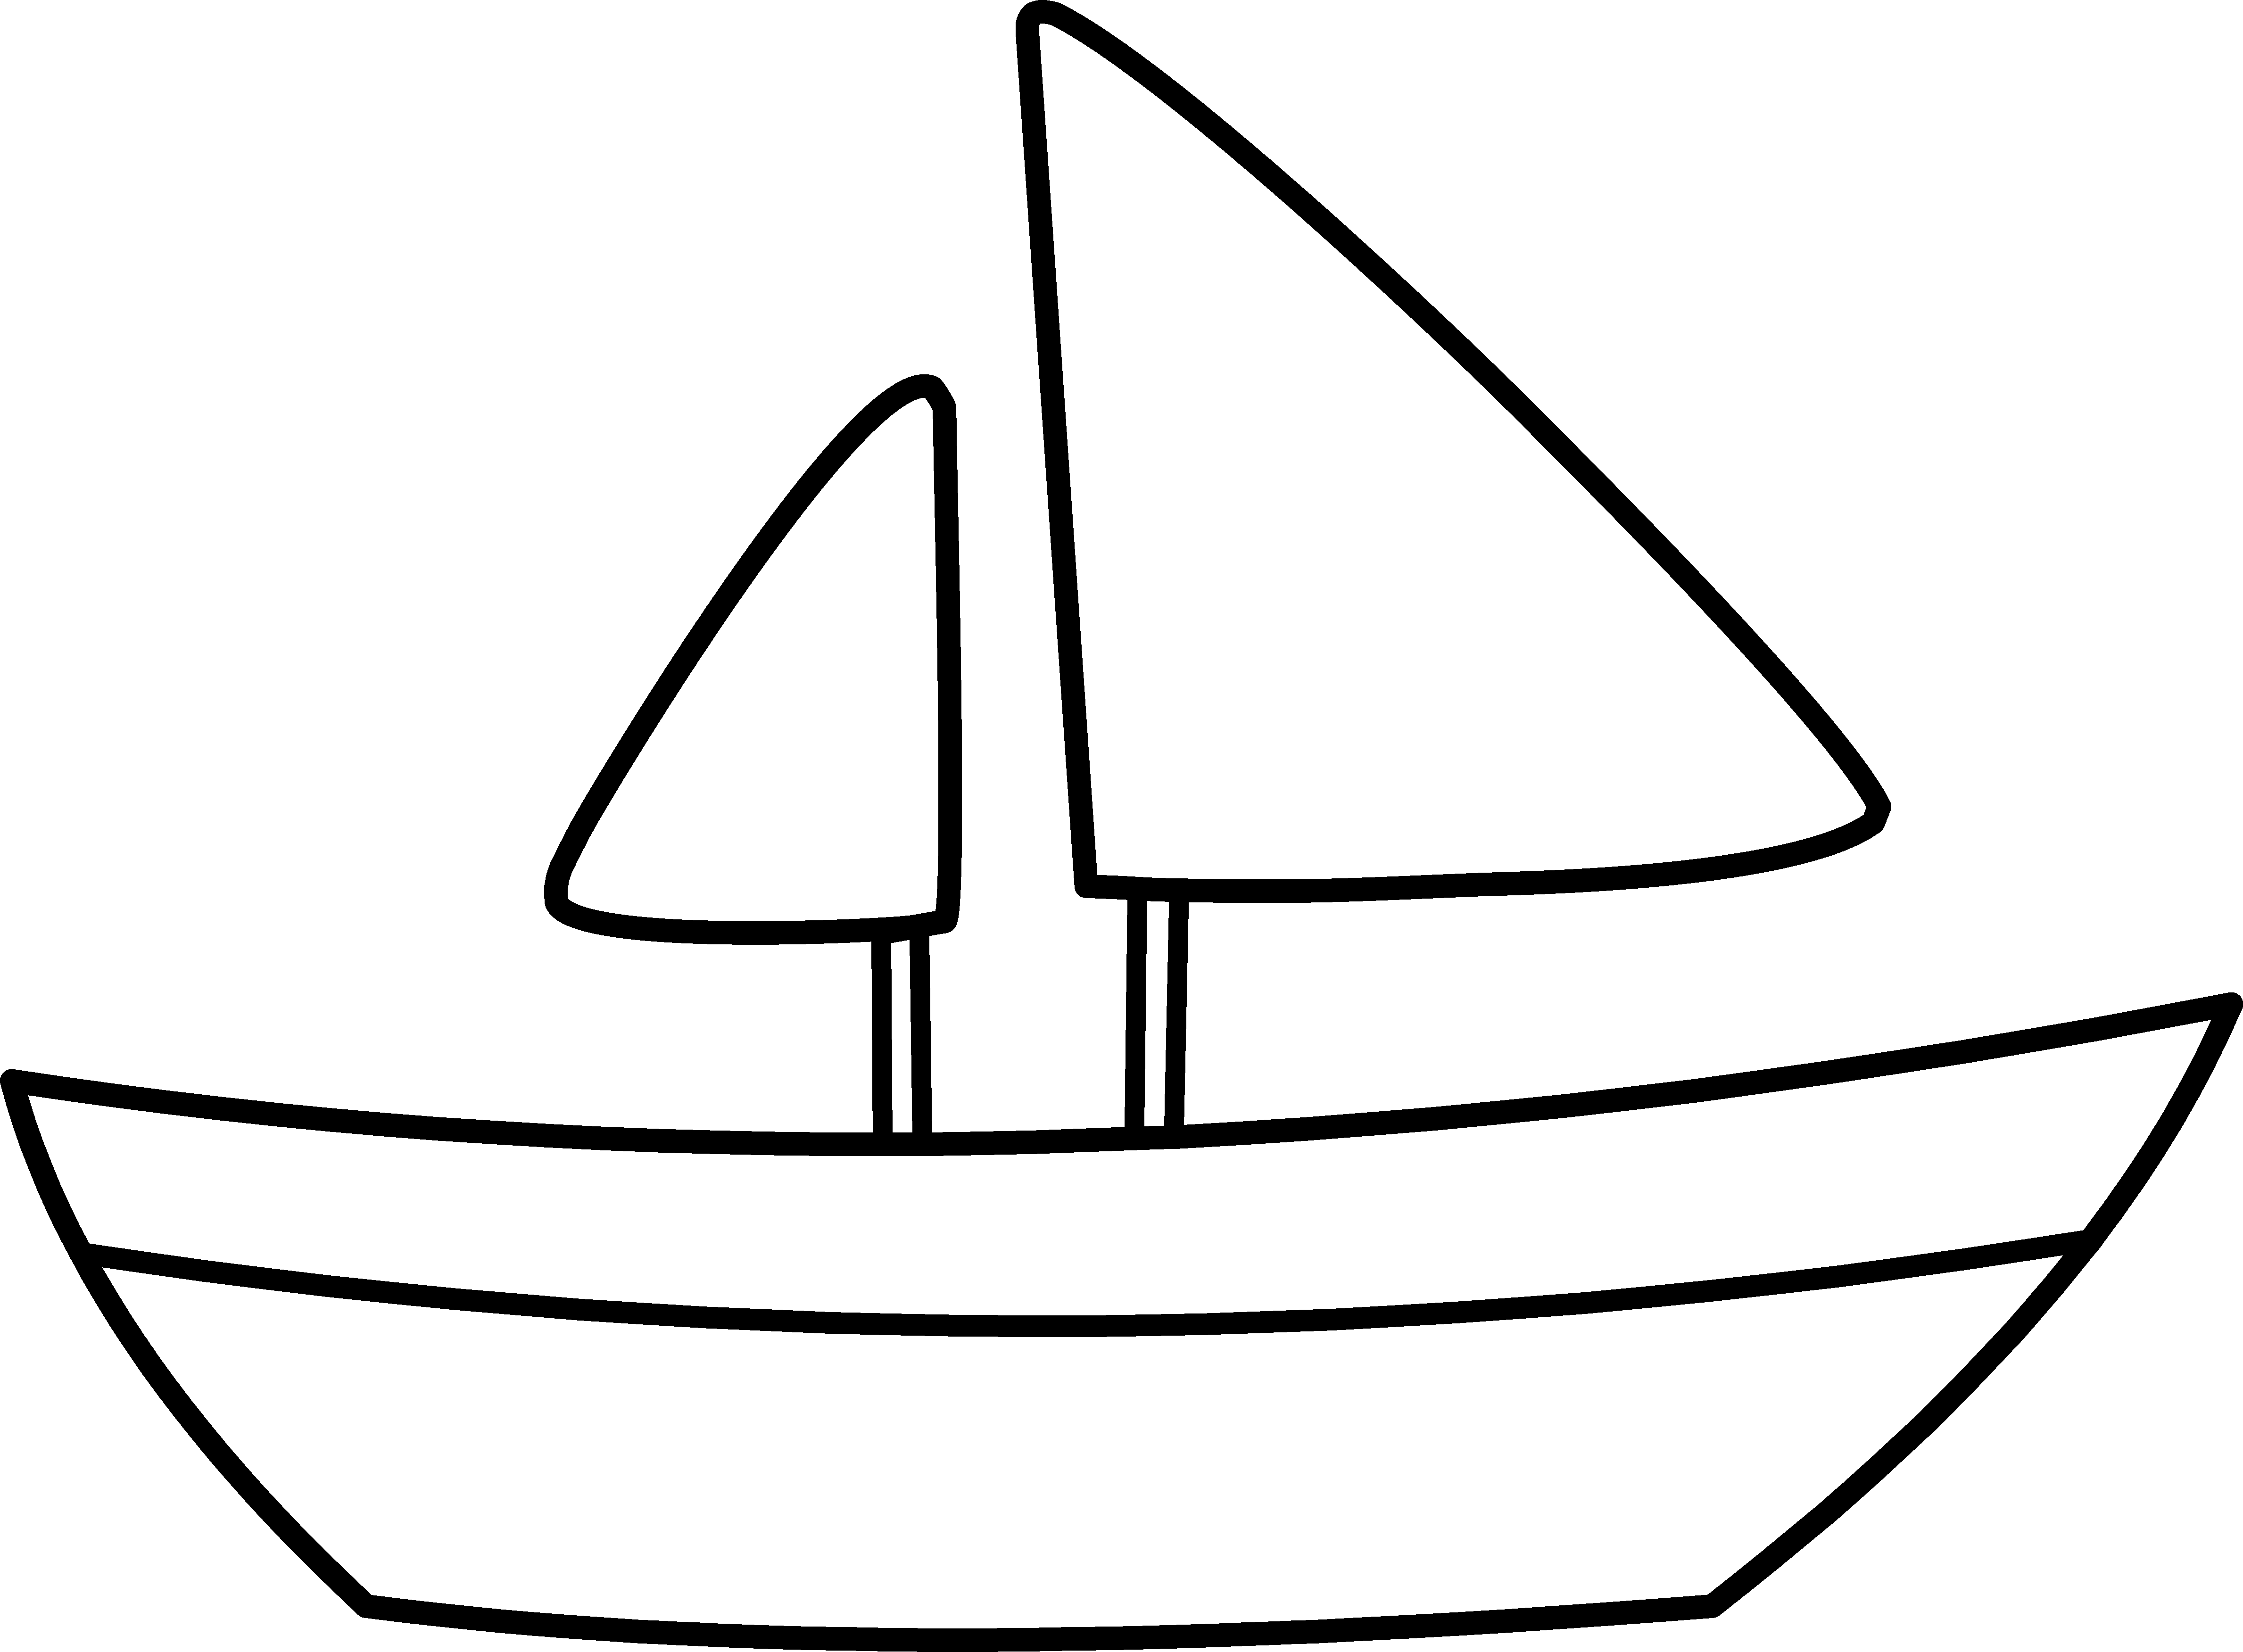 Simple Boat Outline Tattoo - wide 10